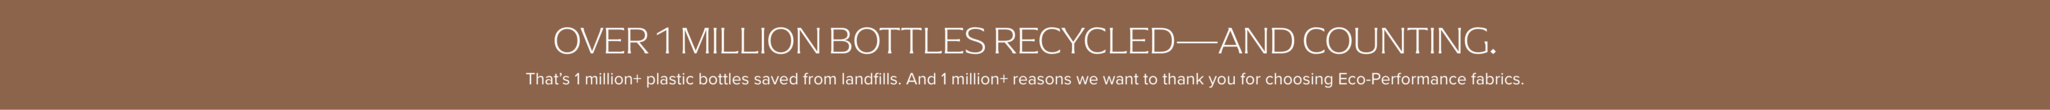 Over 500,000 bottles recycled... and counting. That's 500,000+ plastic bottles saved from landfills. And 1,000,000+ reason we want to thank you for choosing eco-performance fabrics.